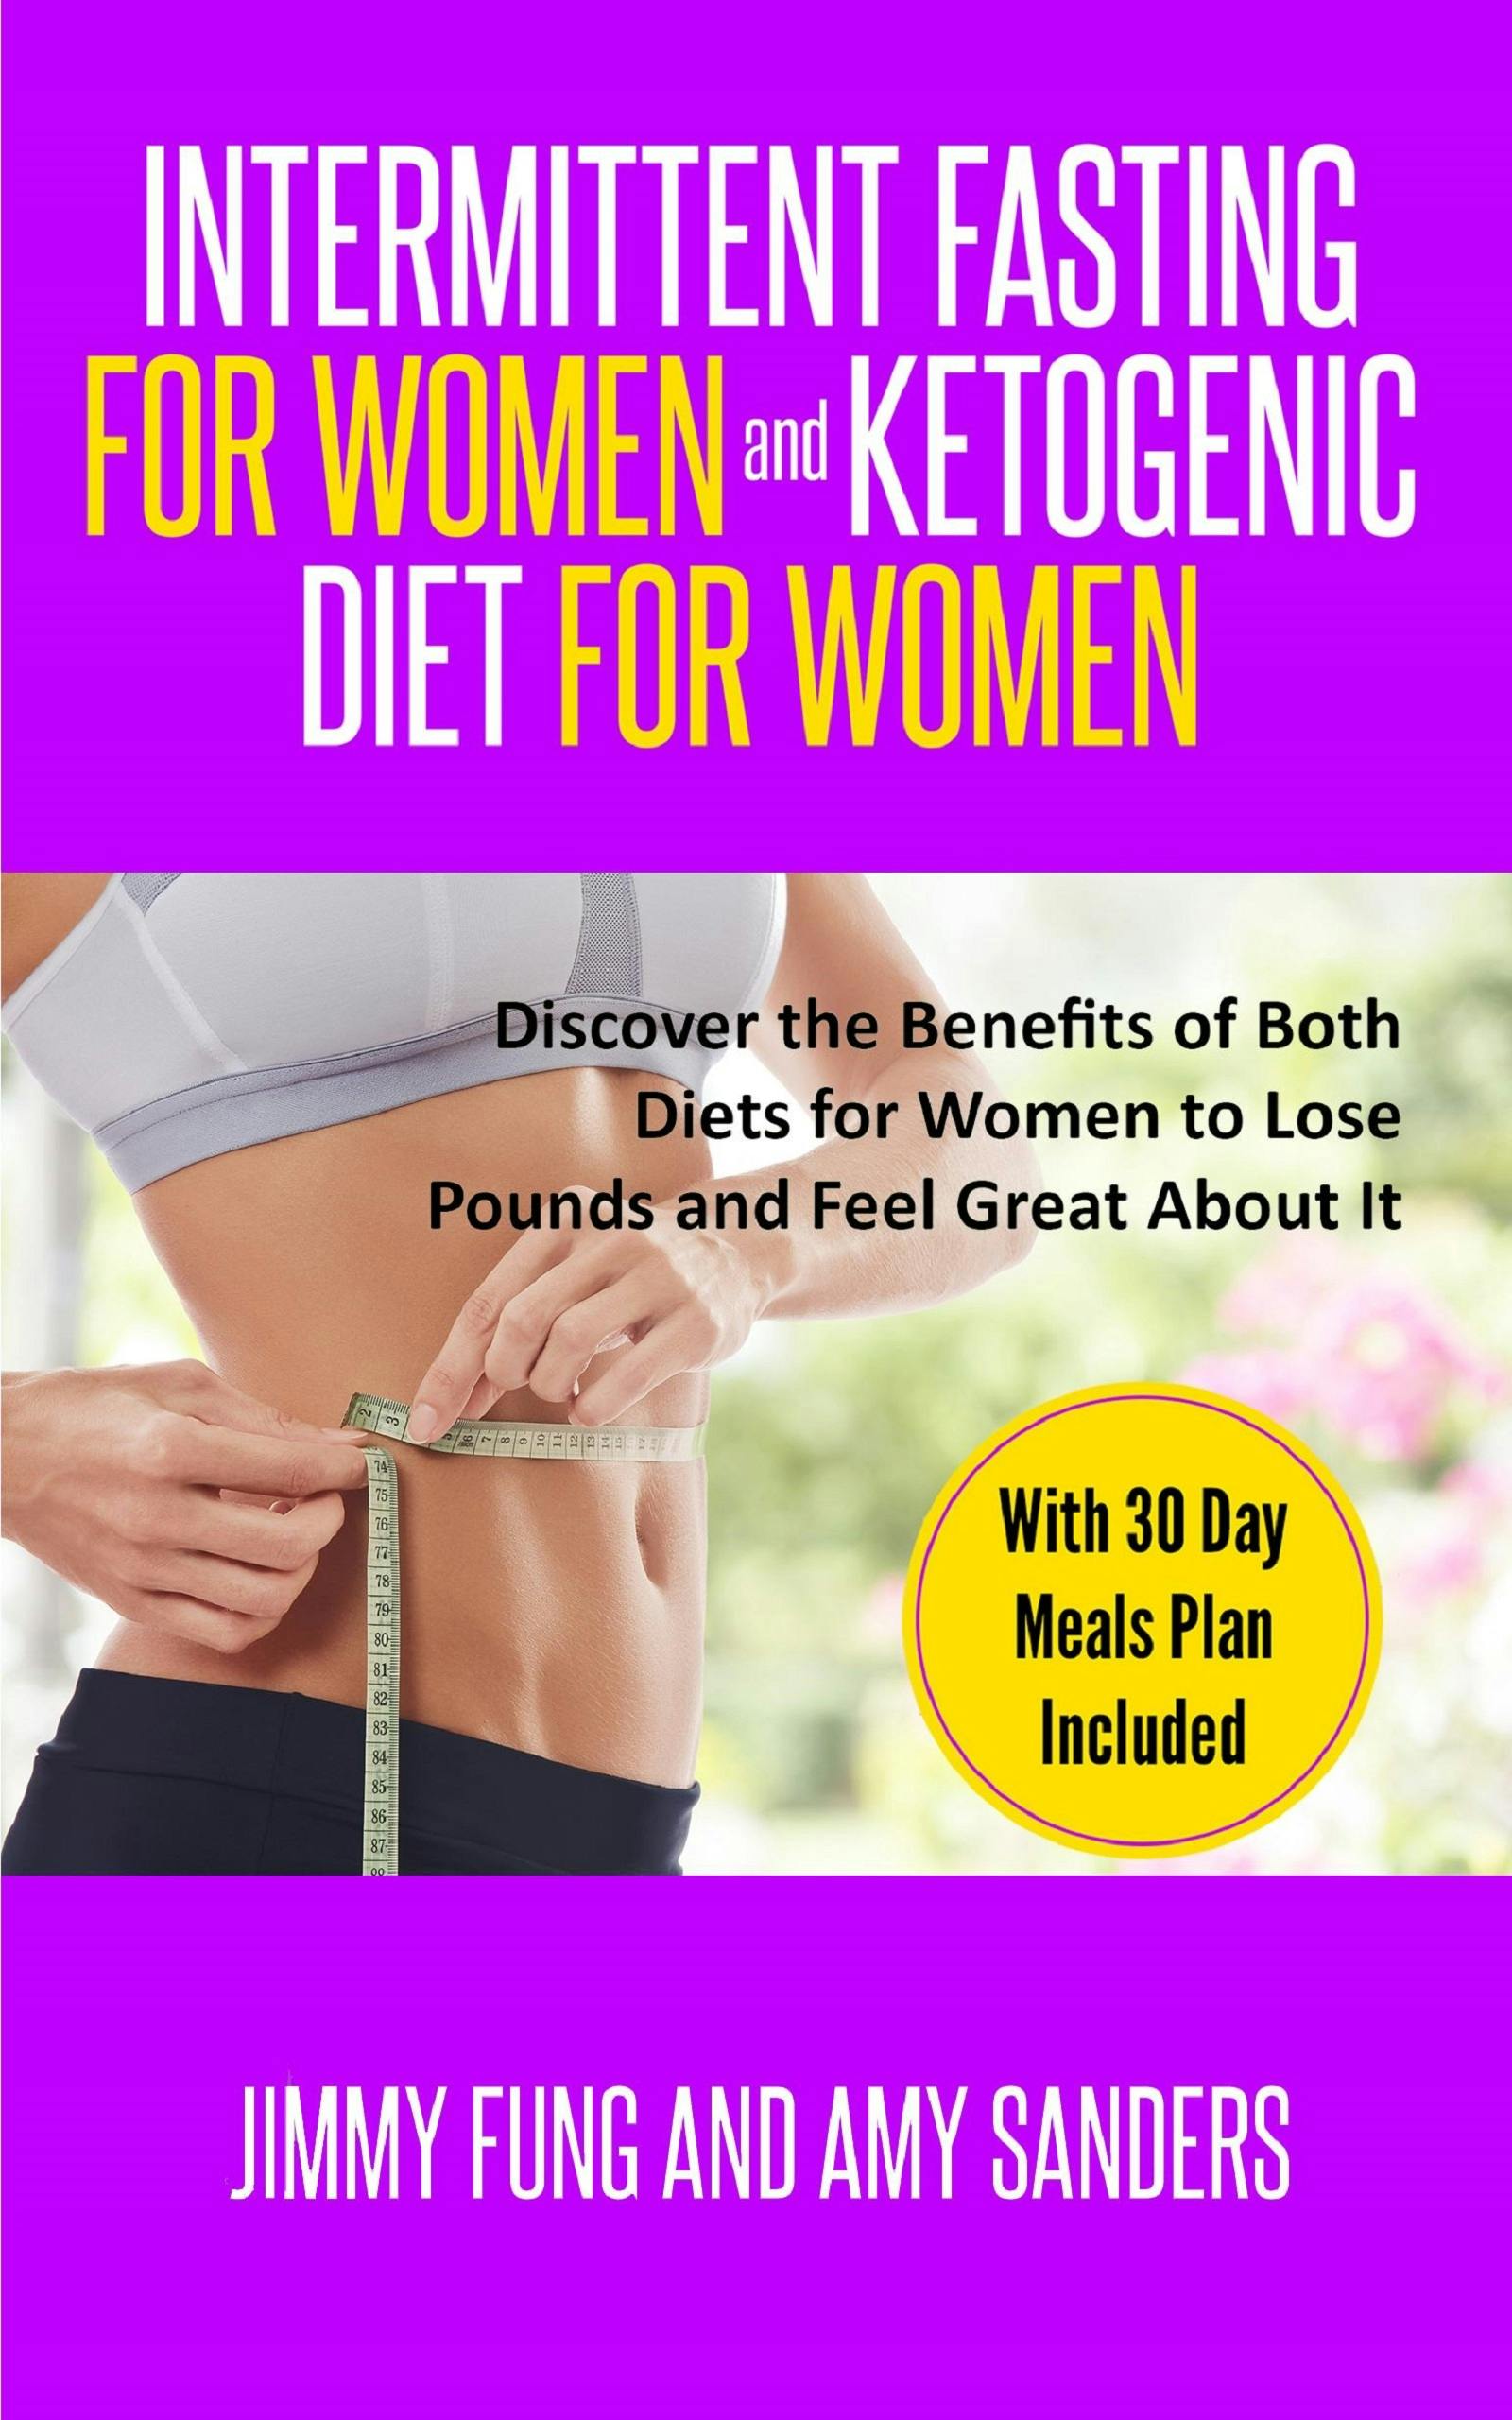 Intermittent Fasting for Women and Ketogenic Diet for Women - Amy Sanders, Jimmy Fung